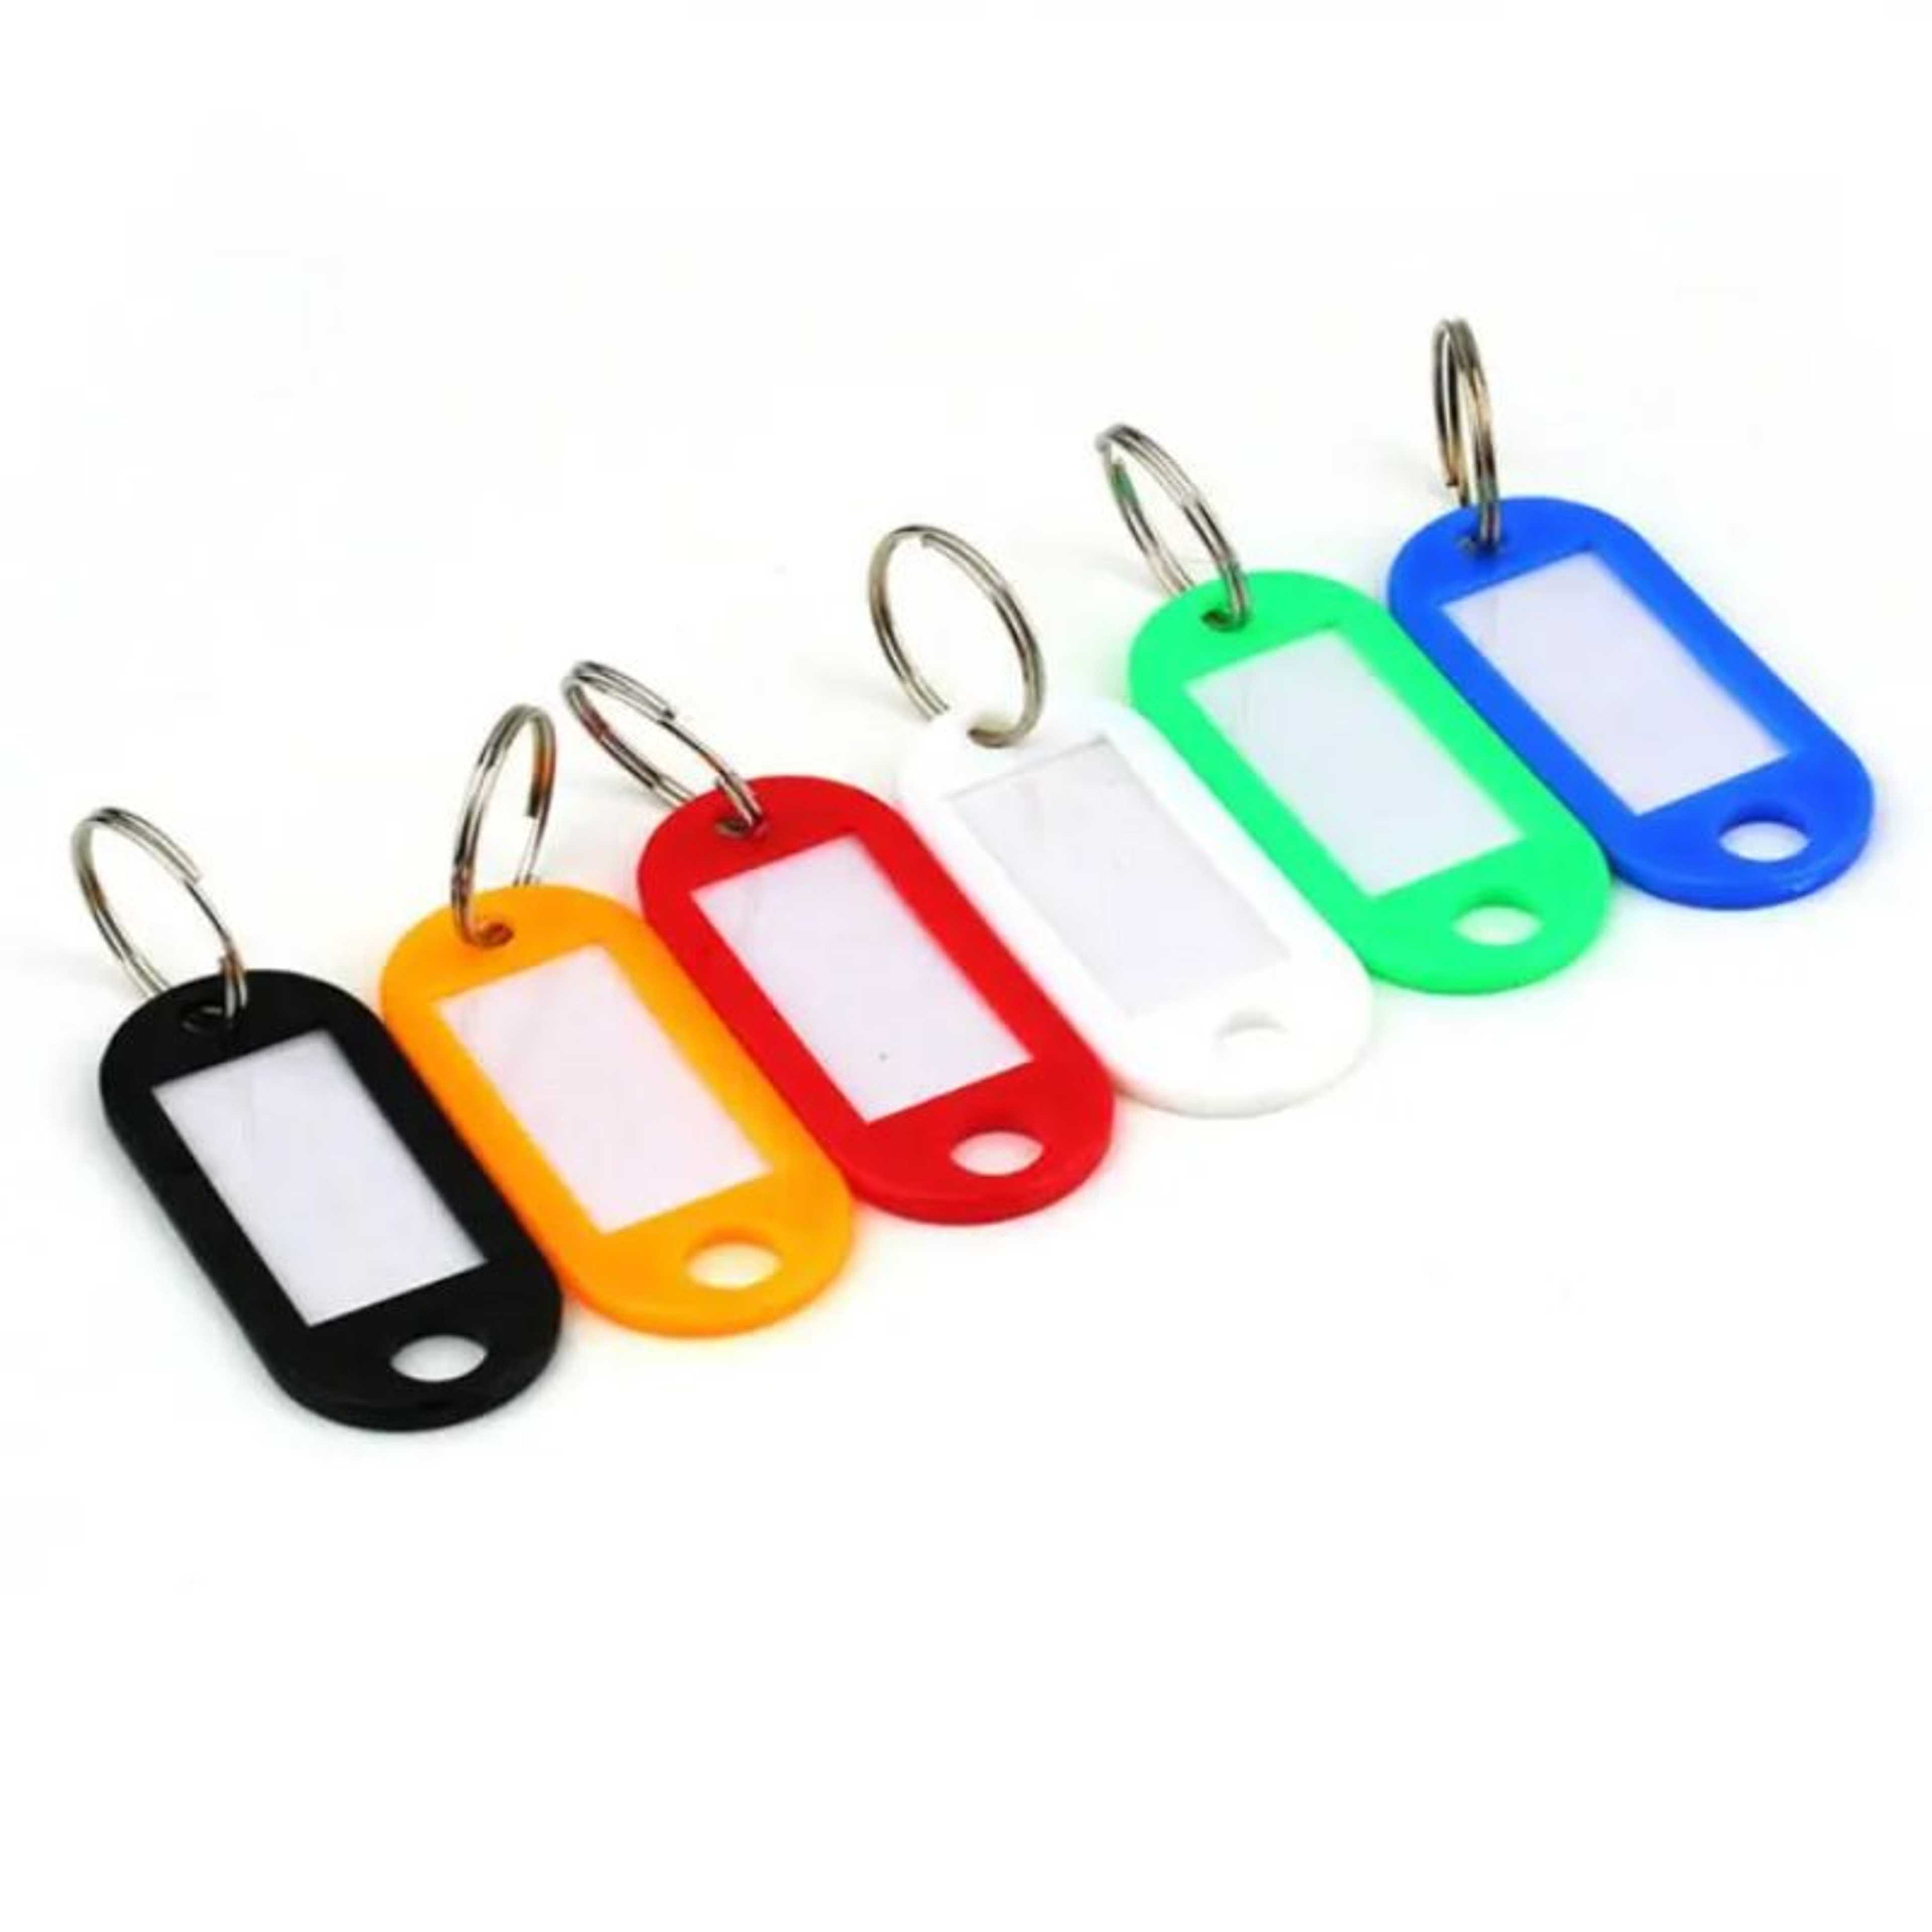 Pack of 10 - Name Tag Keychain Mix Colors Oval Shape Tag Key rings or key chains for hotel room numbers or multipurpose Stationary item